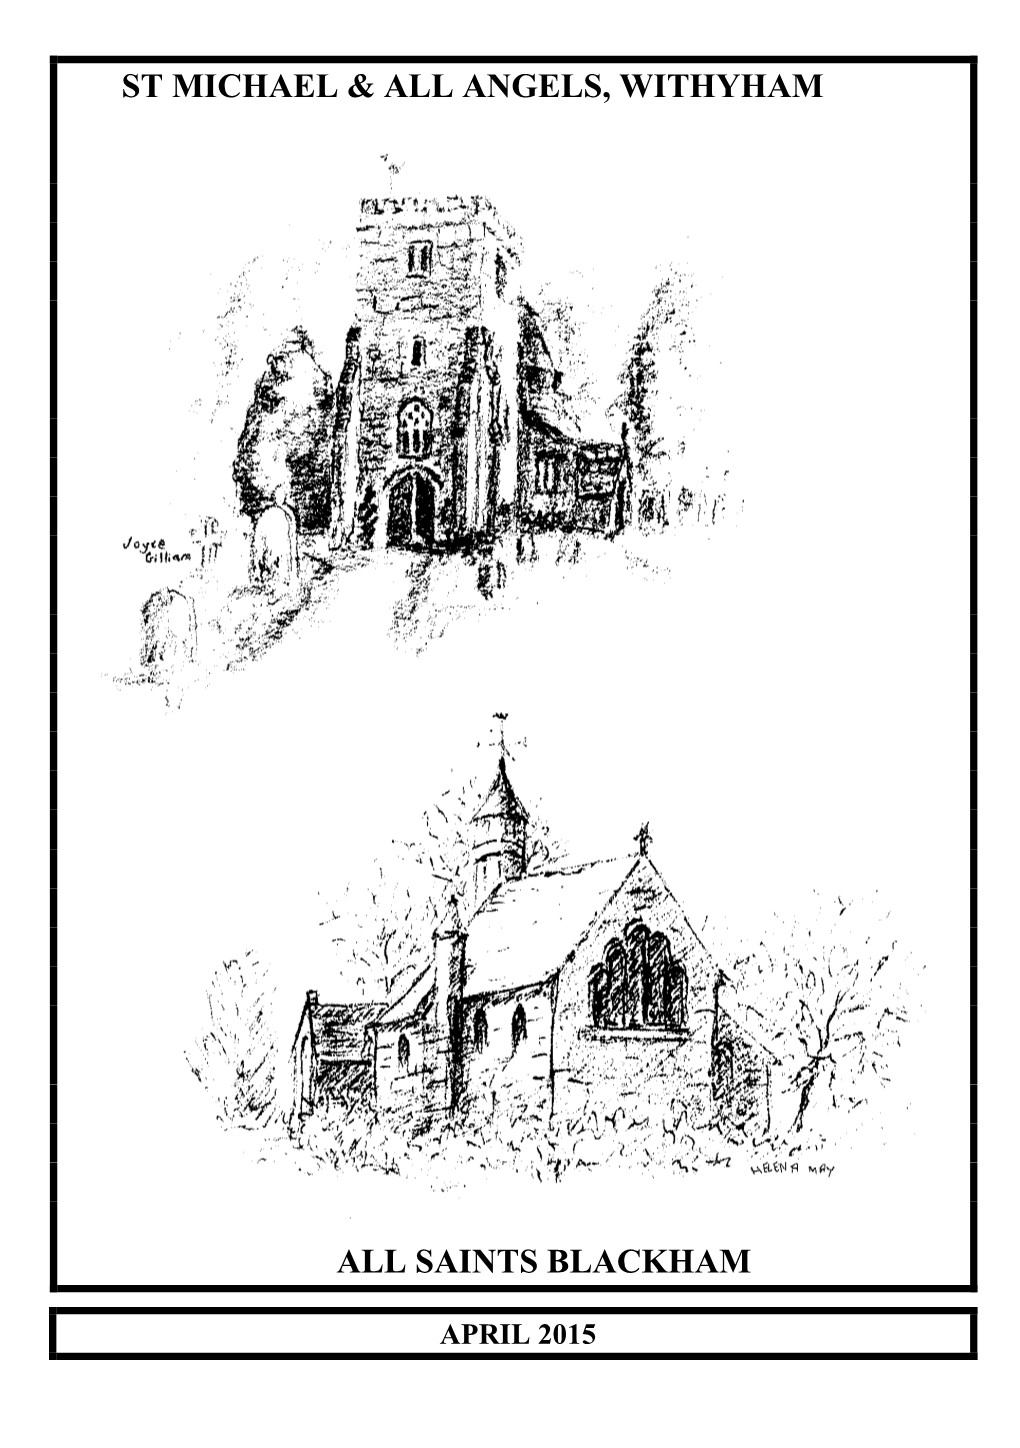 THE PARISH of ST MICHAEL & ALL ANGELS, WITHYHAM with ALL SAINTS